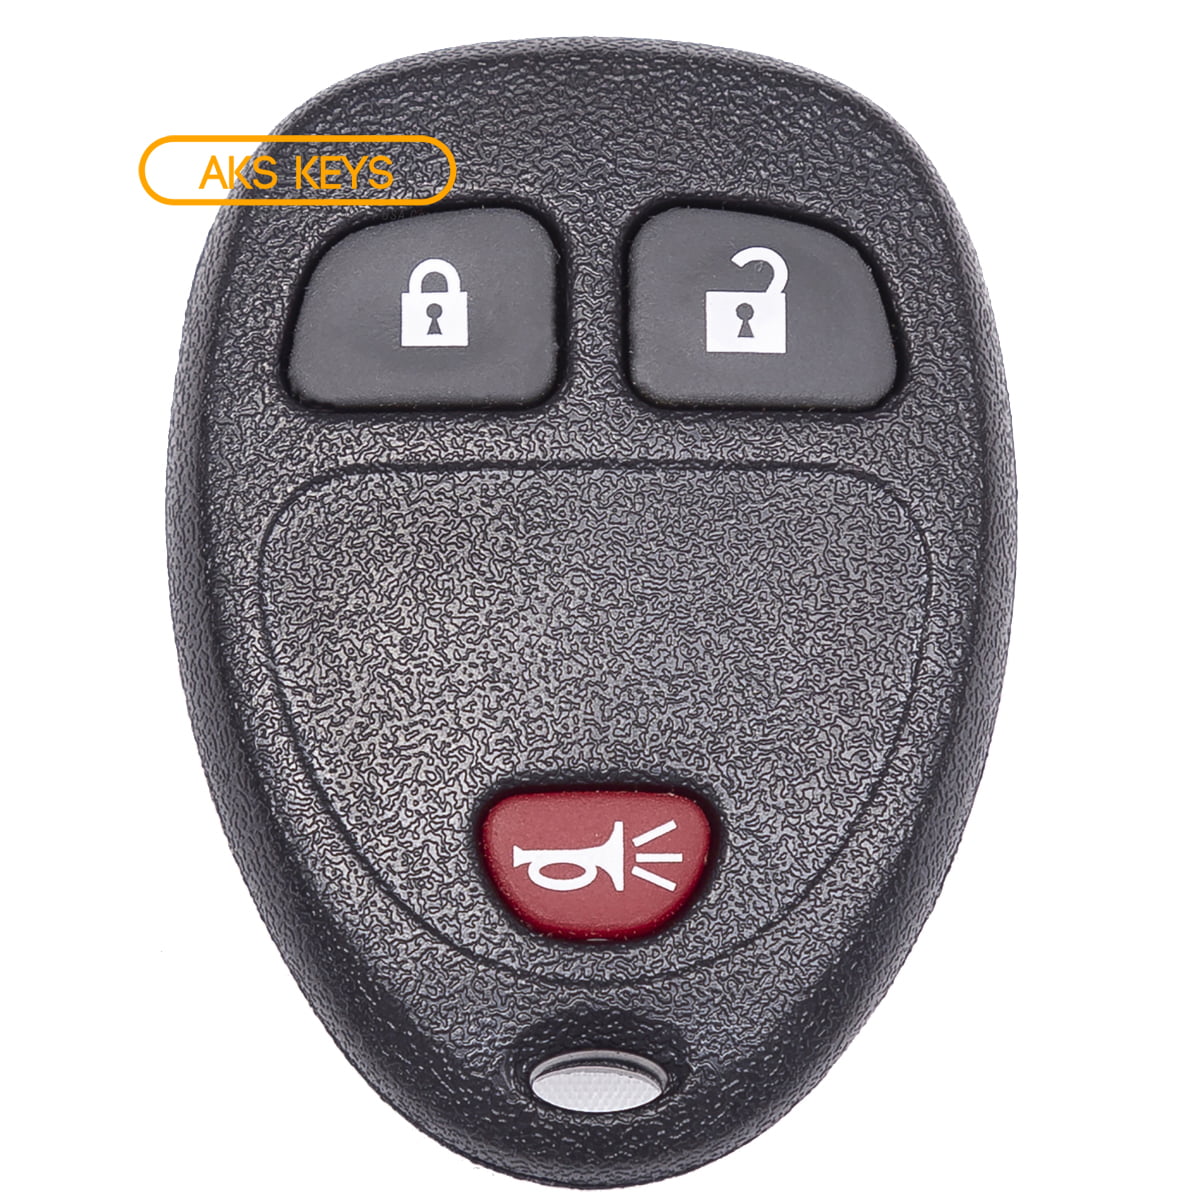 Discount Keyless Replacement Key Fob Car Remote Compatible with KOBGT04A 15777636 